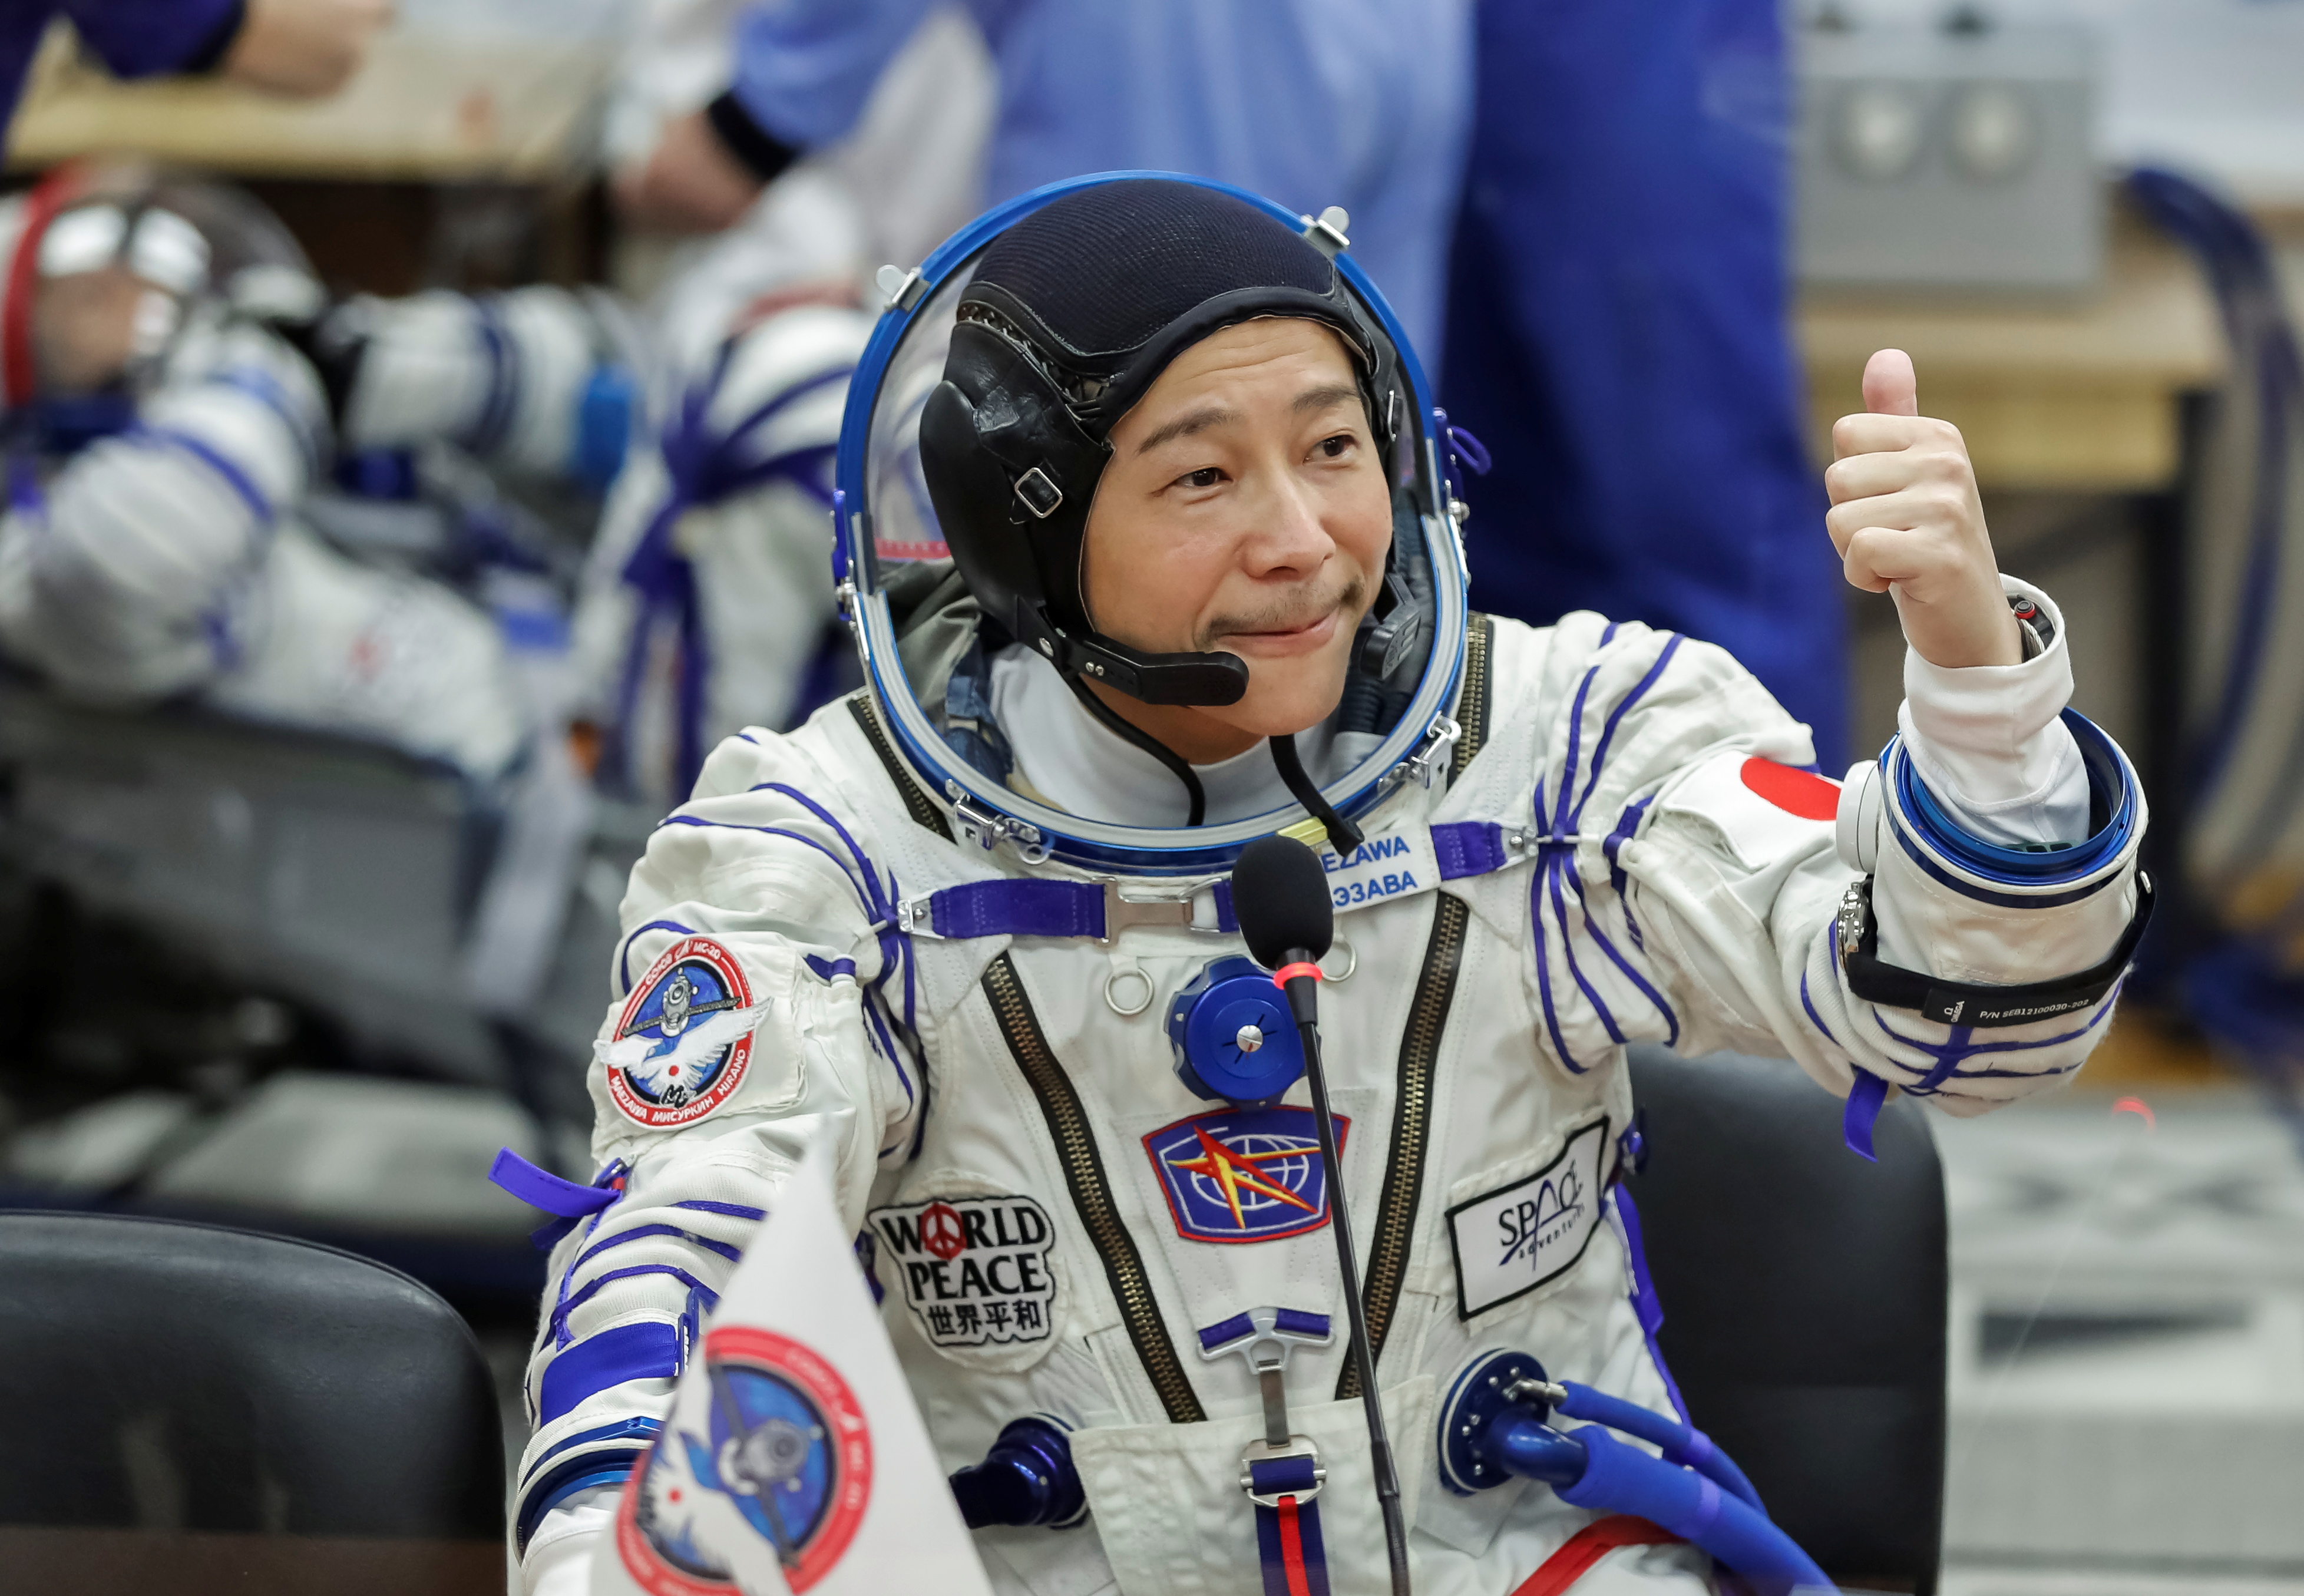 Japanese entrepreneur Yusaku Maezawa reacts as he speaks with his family after donning space suits shortly before the launch to the International Space Station (ISS) at the Baikonur Cosmodrome